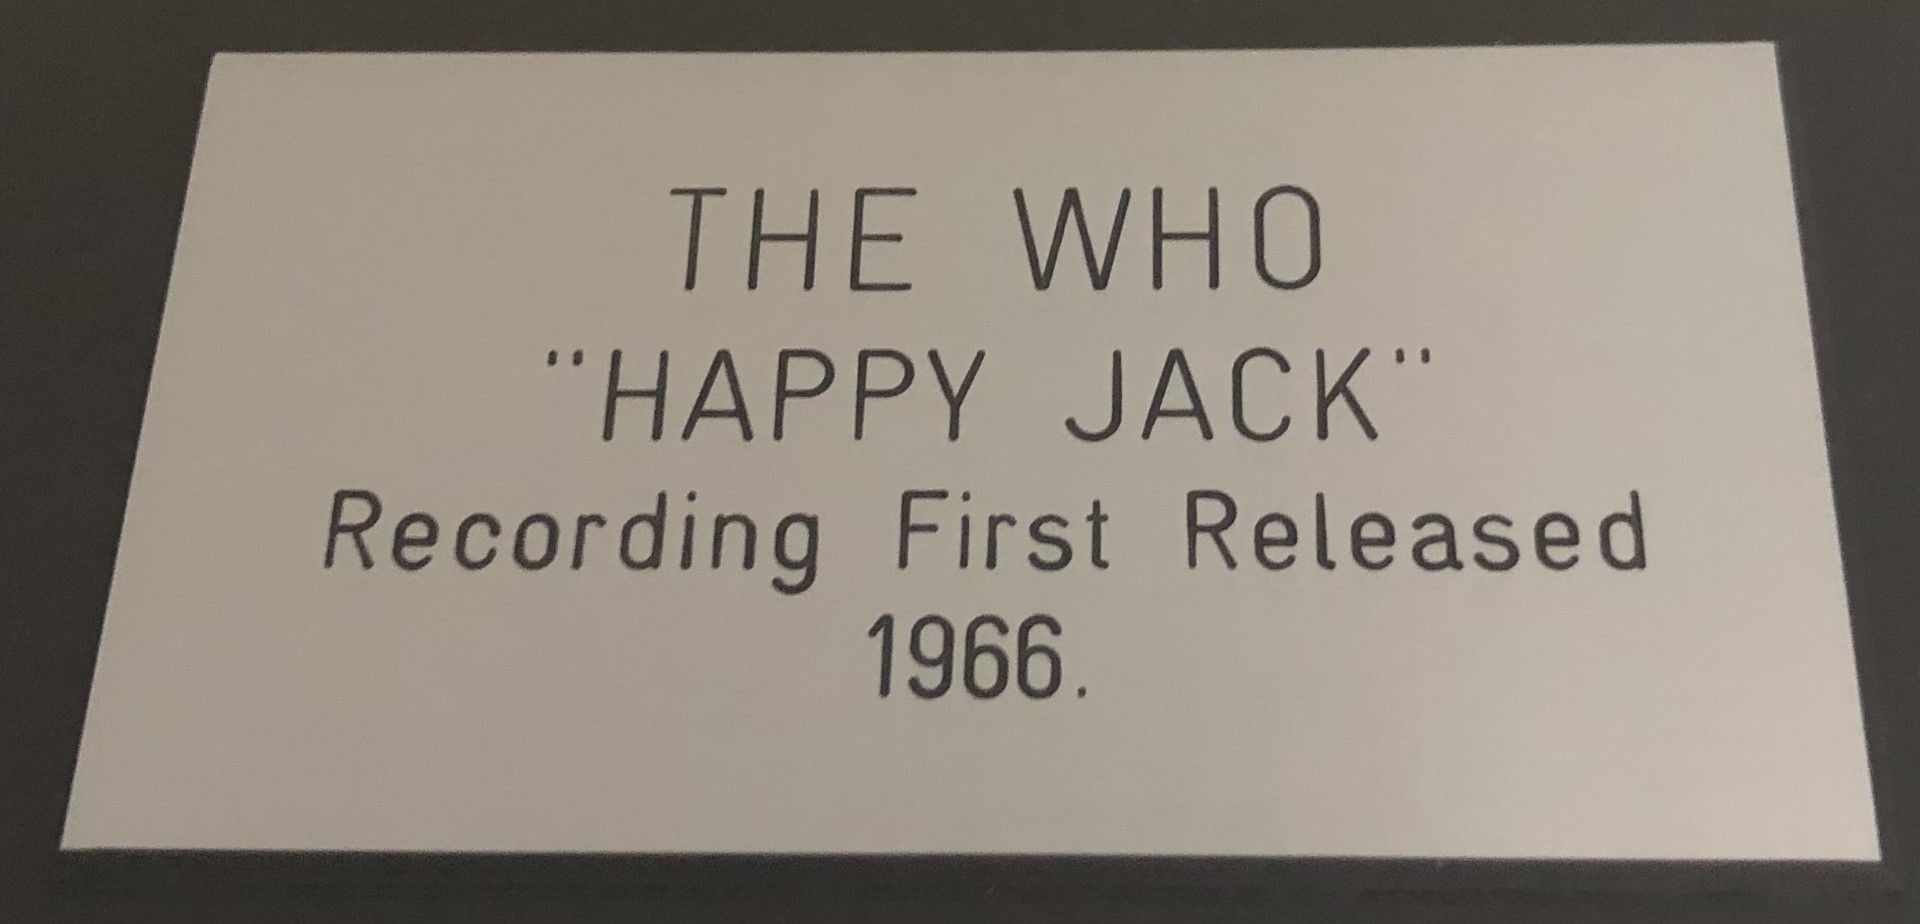 1 x Framed THE WHO Silver 7 Inch Vinyl Record - HAPPY JACK - Image 2 of 5